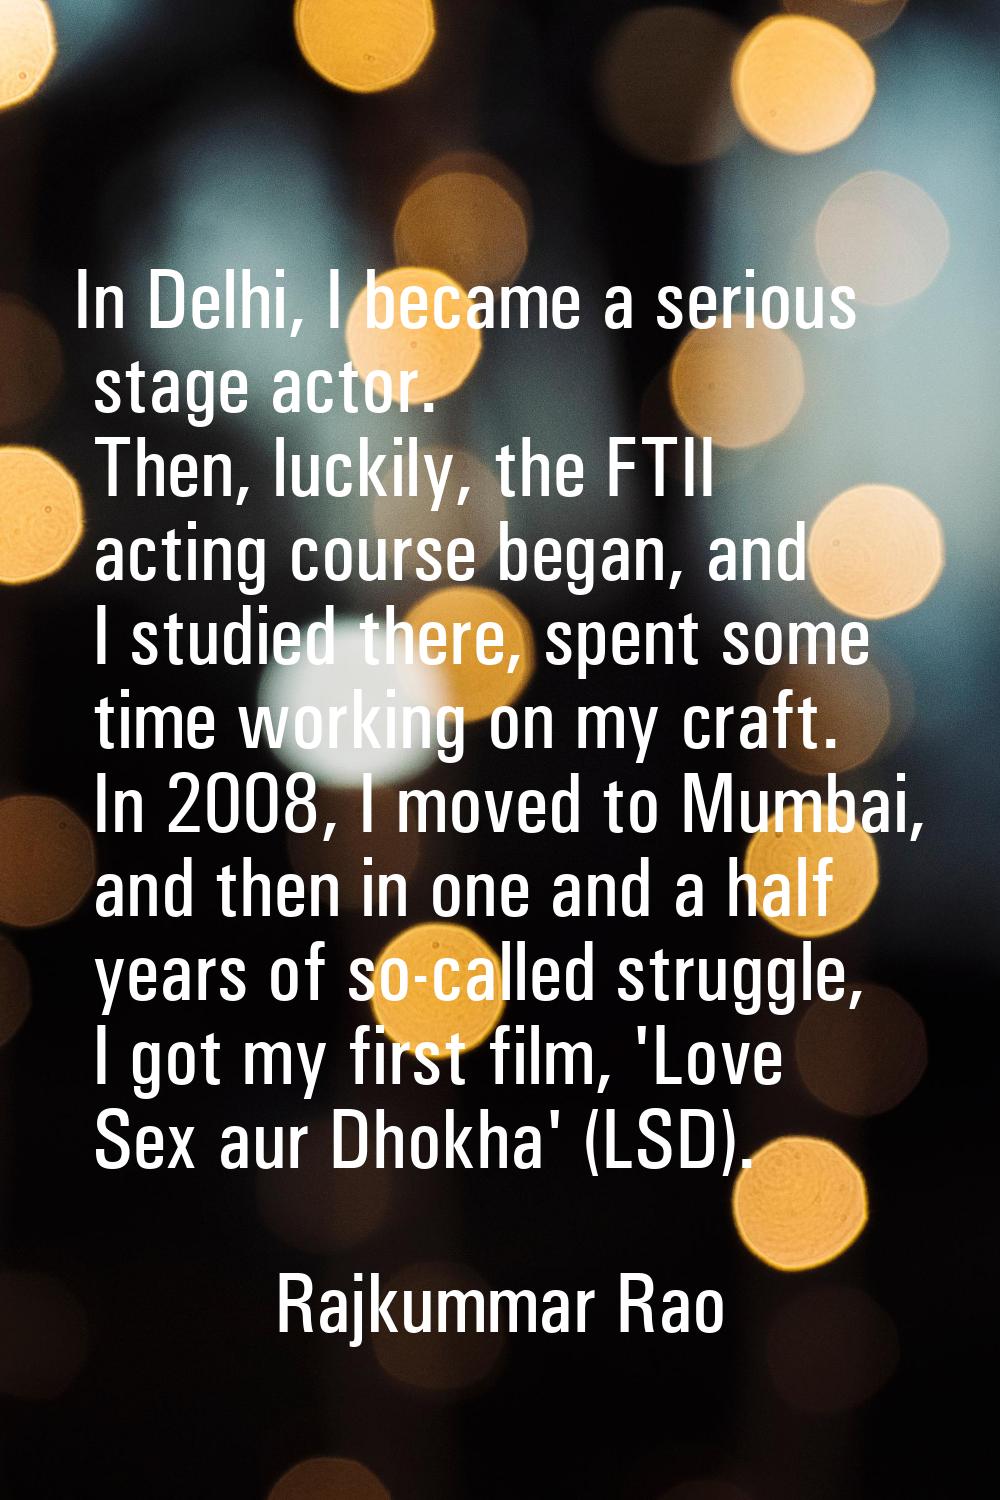 In Delhi, I became a serious stage actor. Then, luckily, the FTII acting course began, and I studie